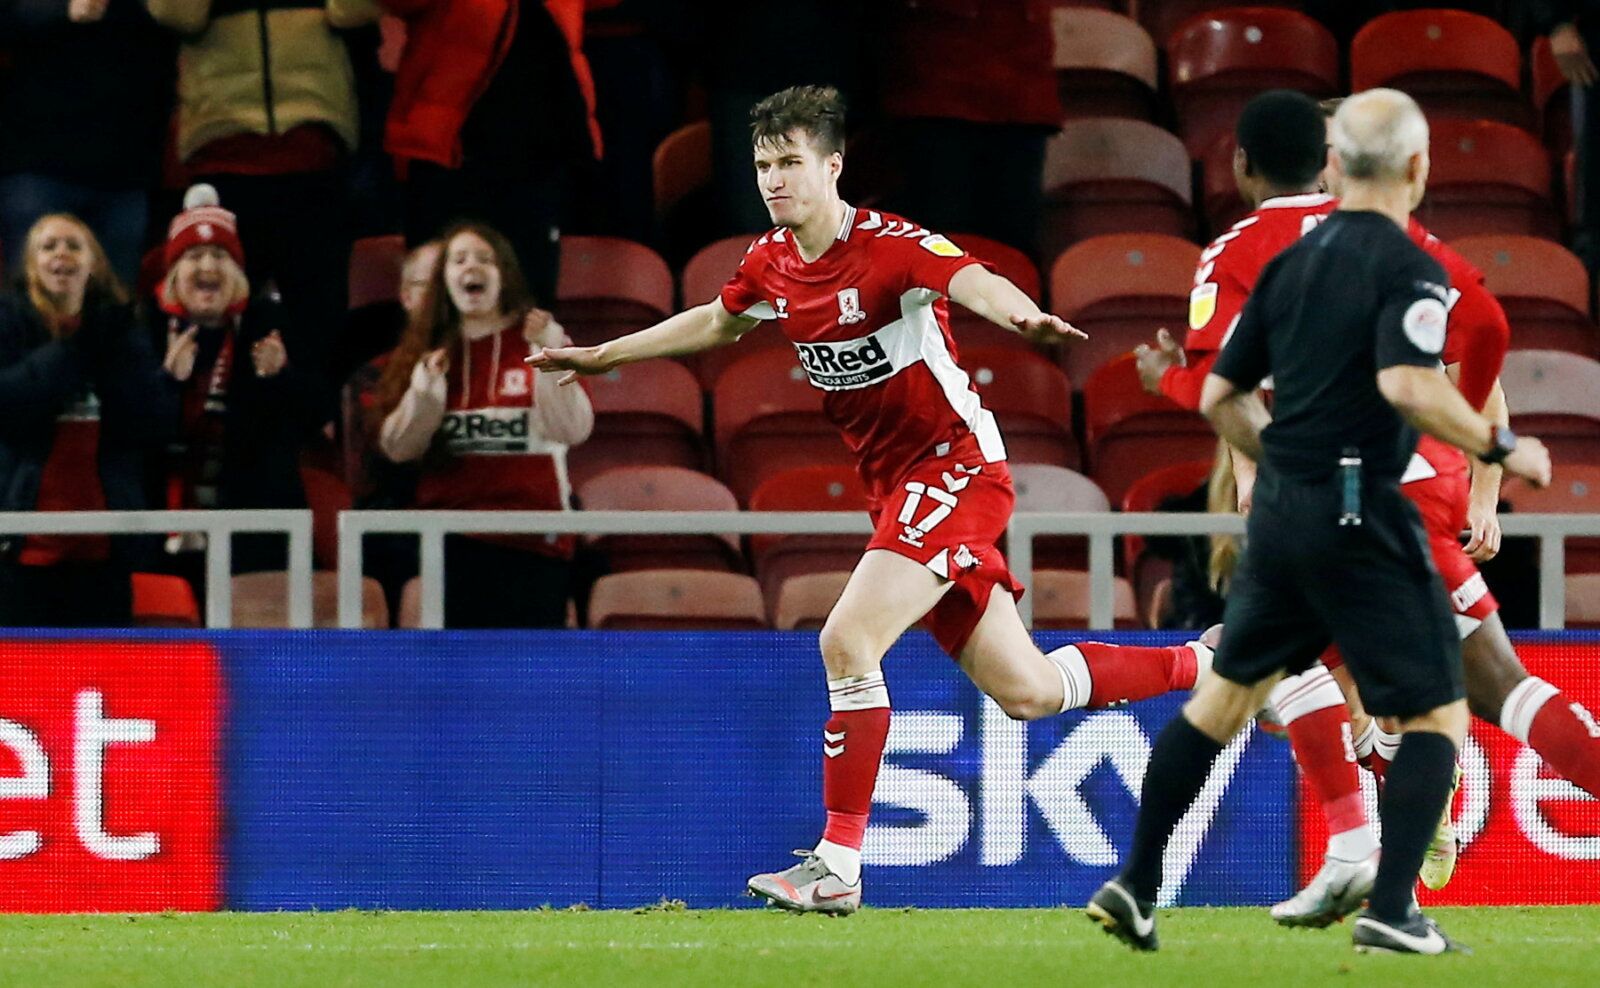 Soccer Football - Championship - Middlesbrough v Preston North End - Riverside Stadium, Middlesbrough, Britain - November 23, 2021 Middlesbrough's Paddy McNair celebrates scoring their first goal   Action Images/Craig Brough